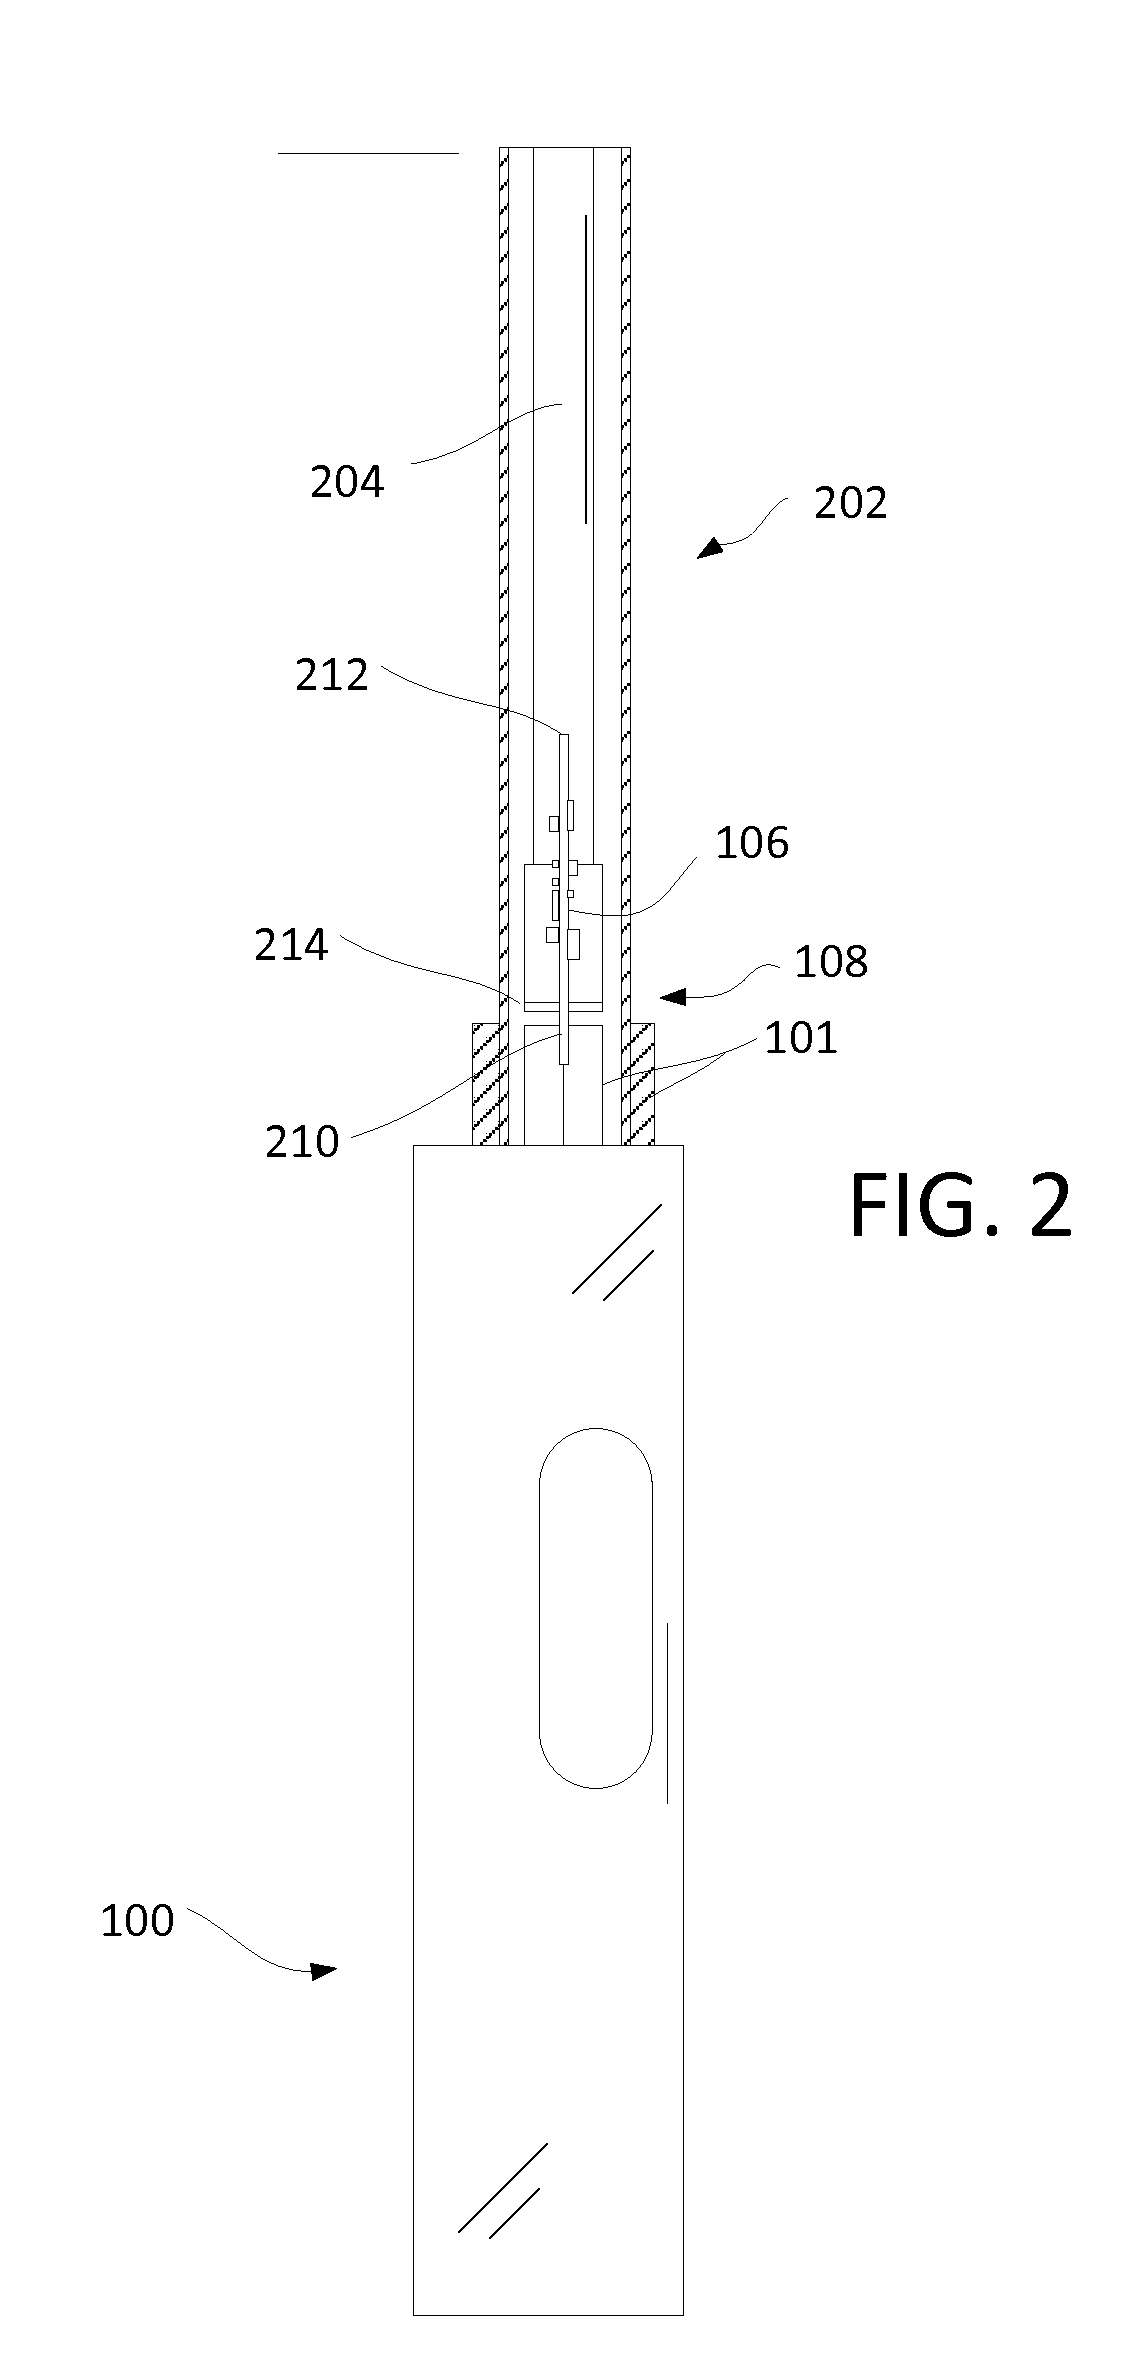 Orthogonal feed technique to recover spatial volume used for antenna matching